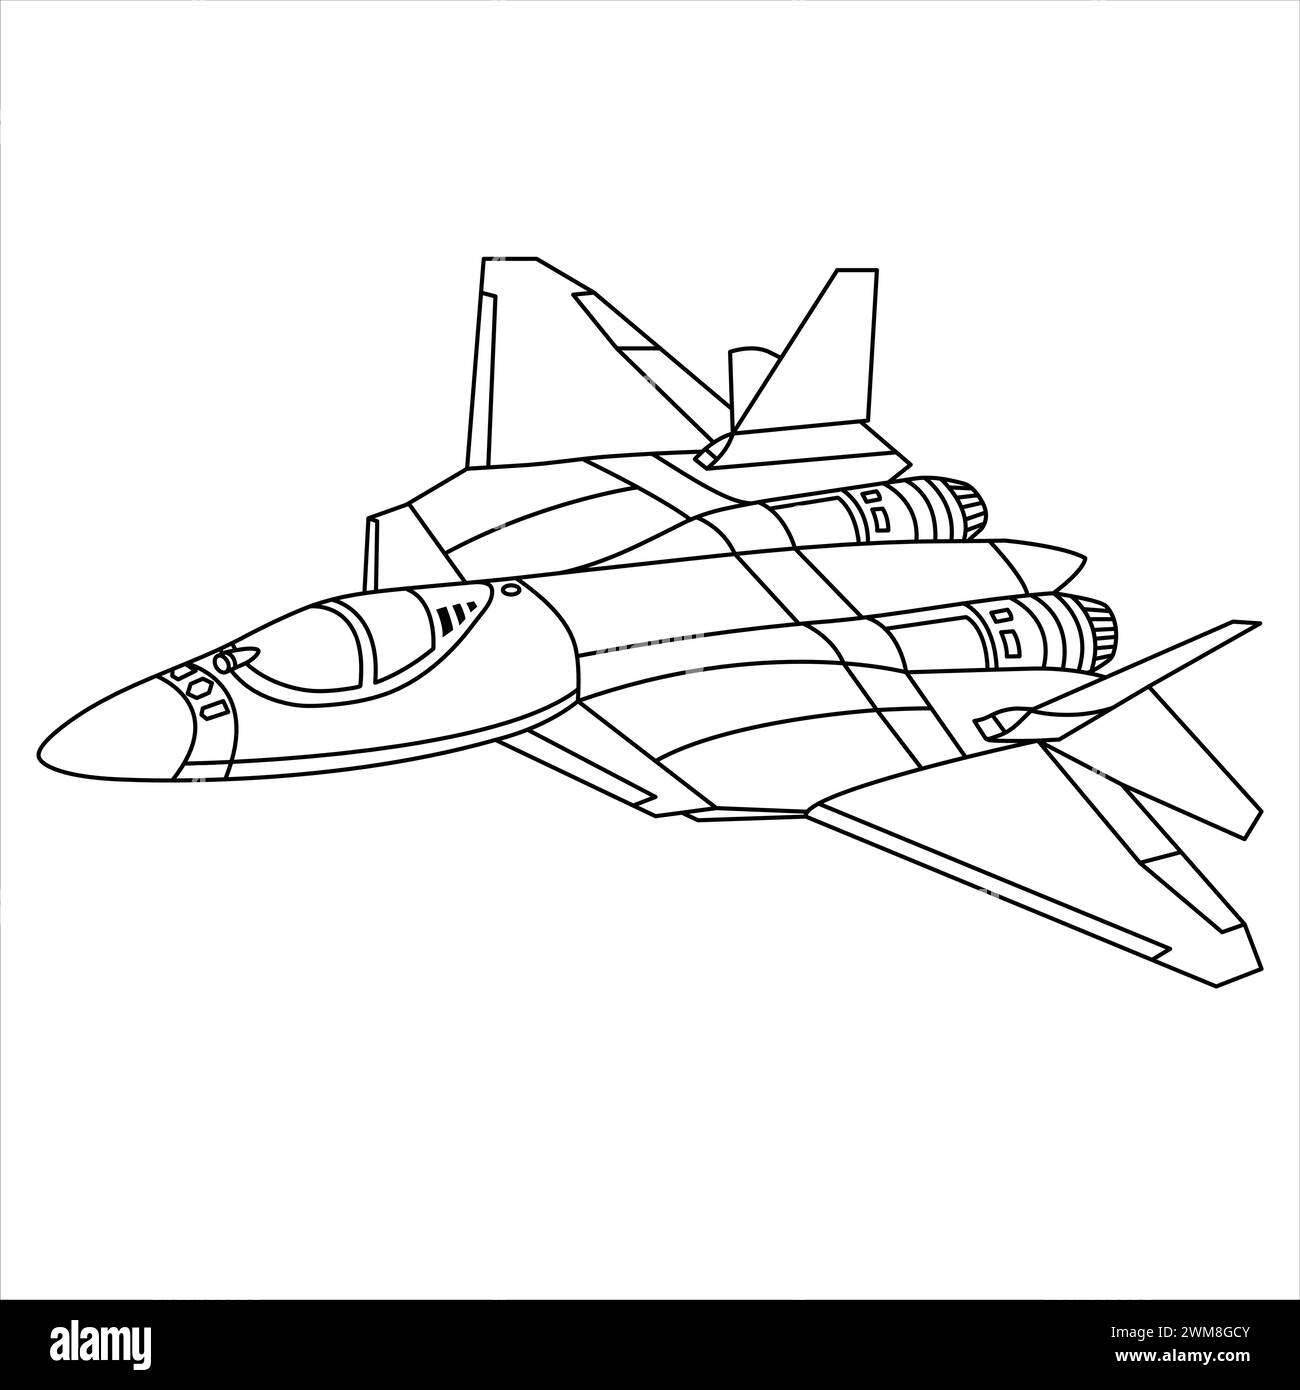 Sukhoi Su-57 Jet Fighter - Russian Stealth Aircraft Outline Design. Aircraft Coloring Page. Cartoon Airplane Isolated on White Background Stock Vector